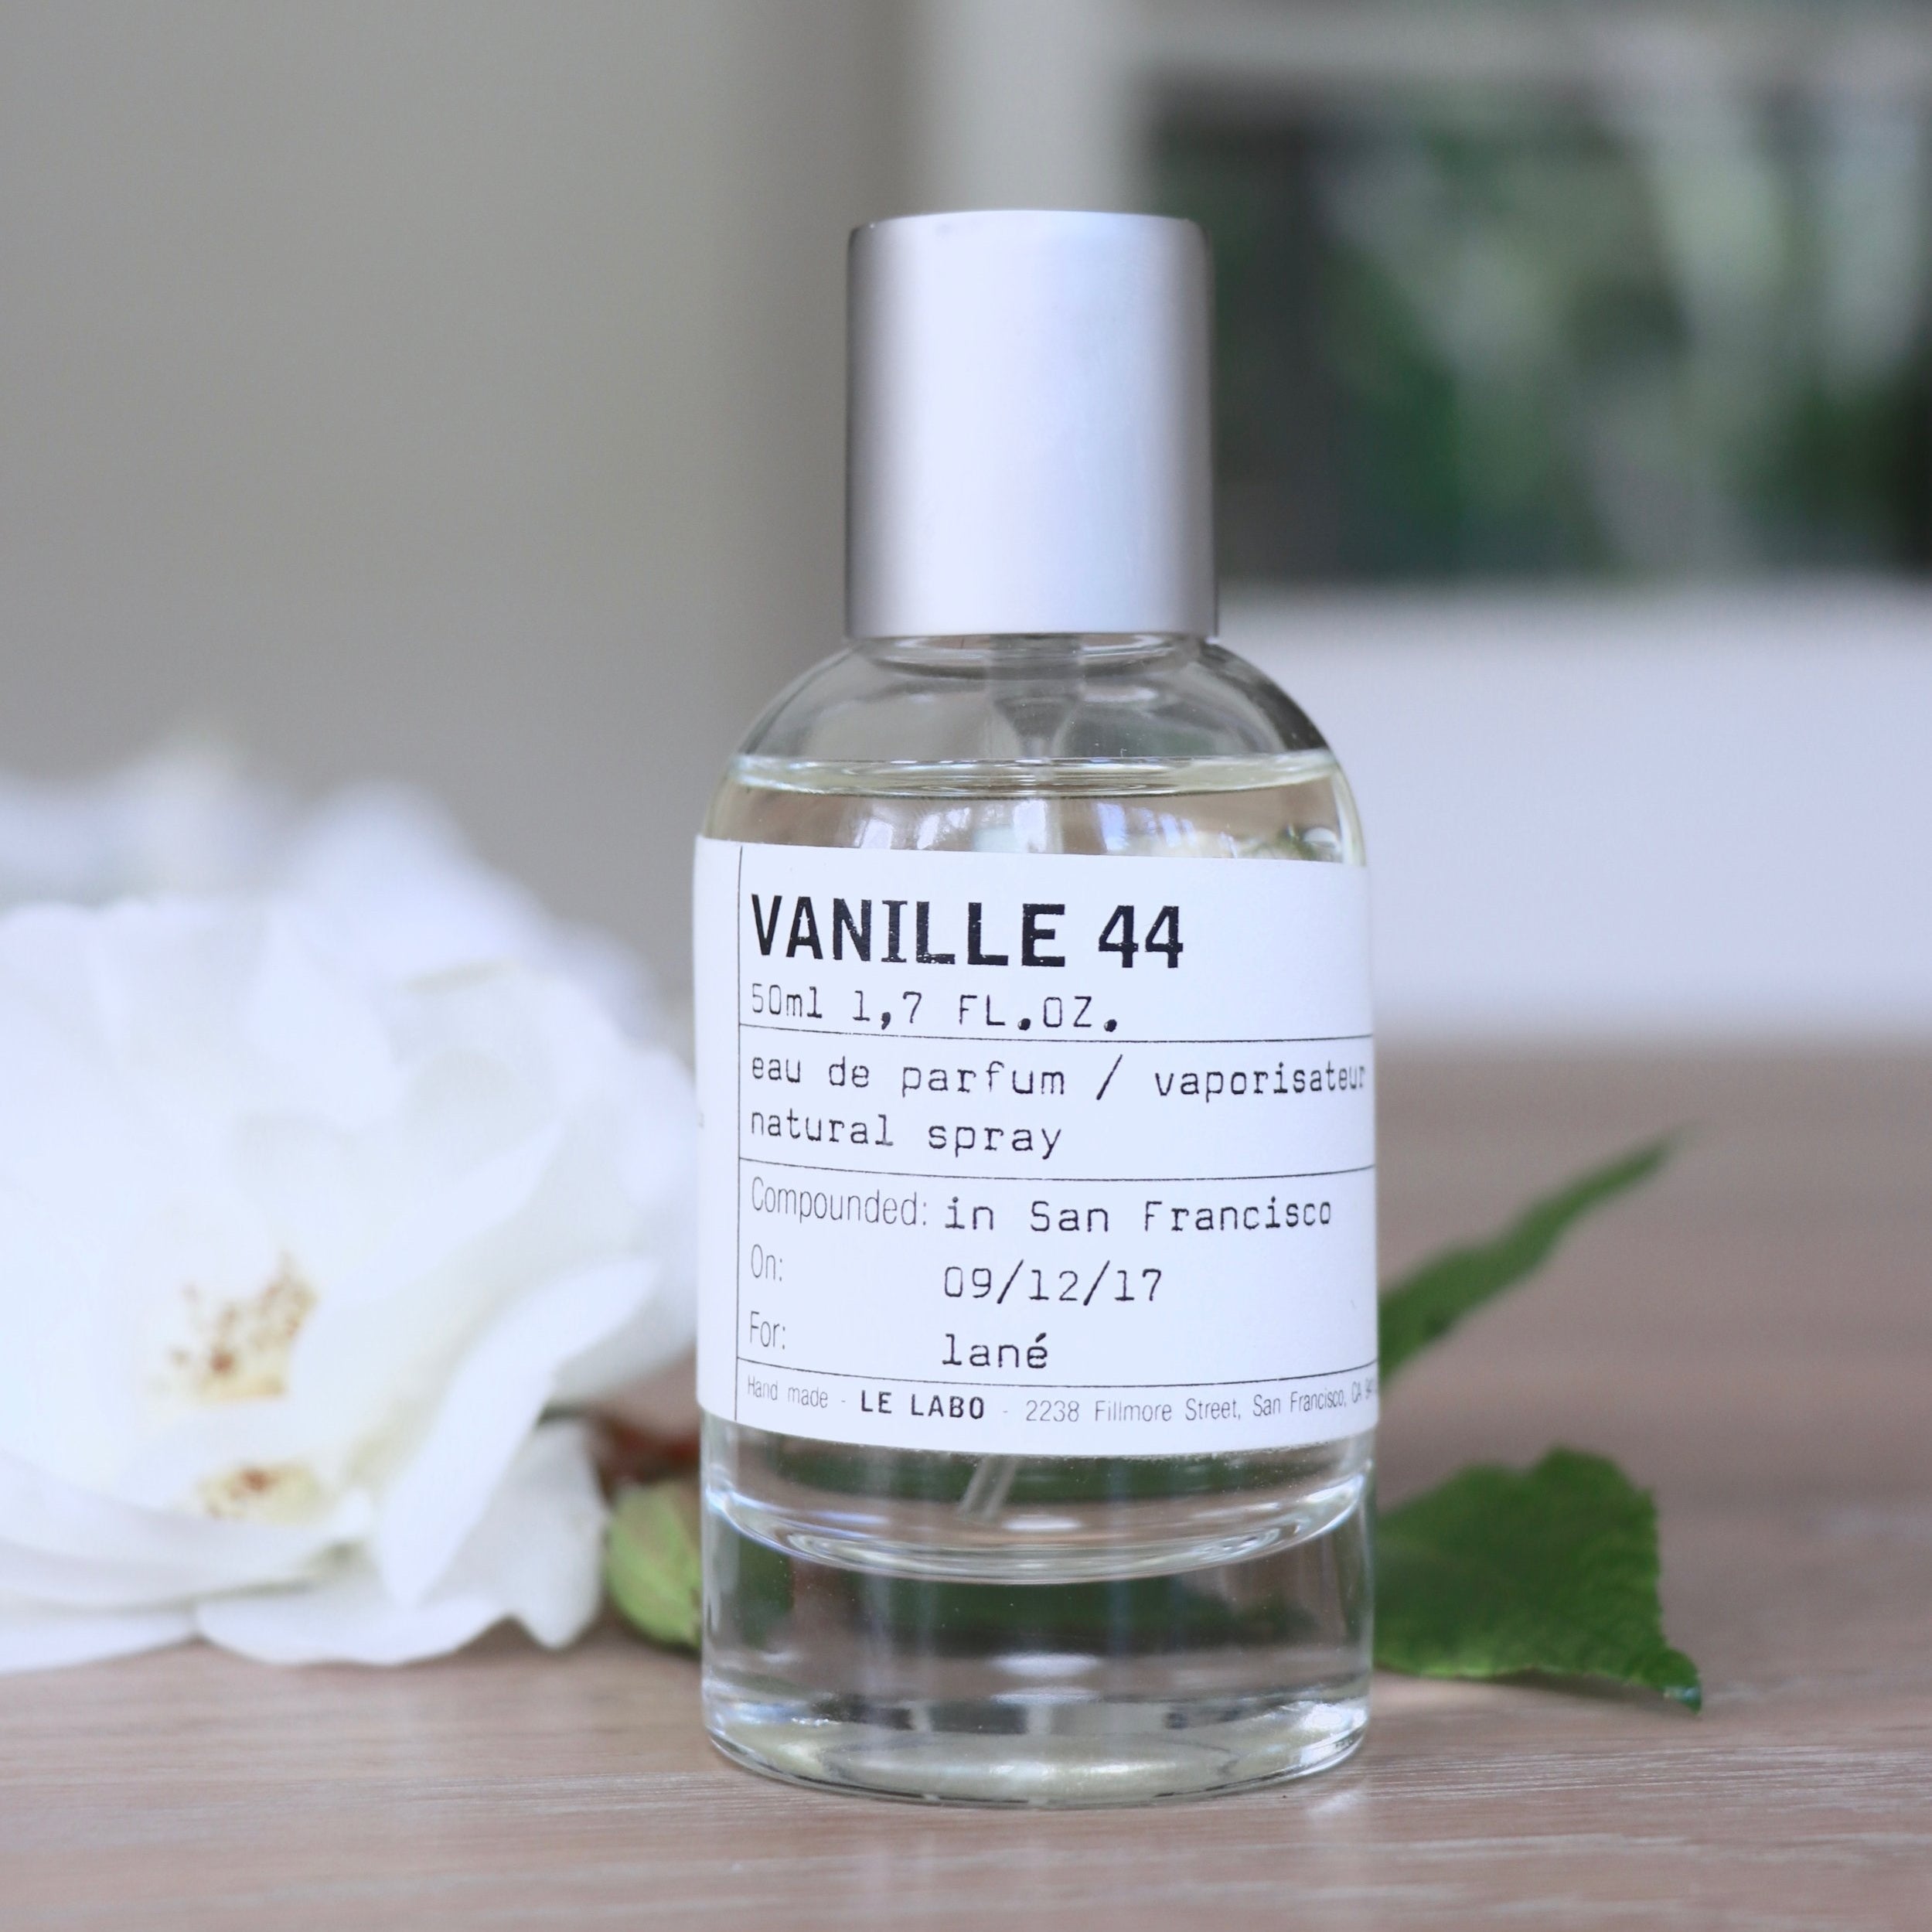 Inspired by Vanille 44 from Le Labo – Andromeda's Moon